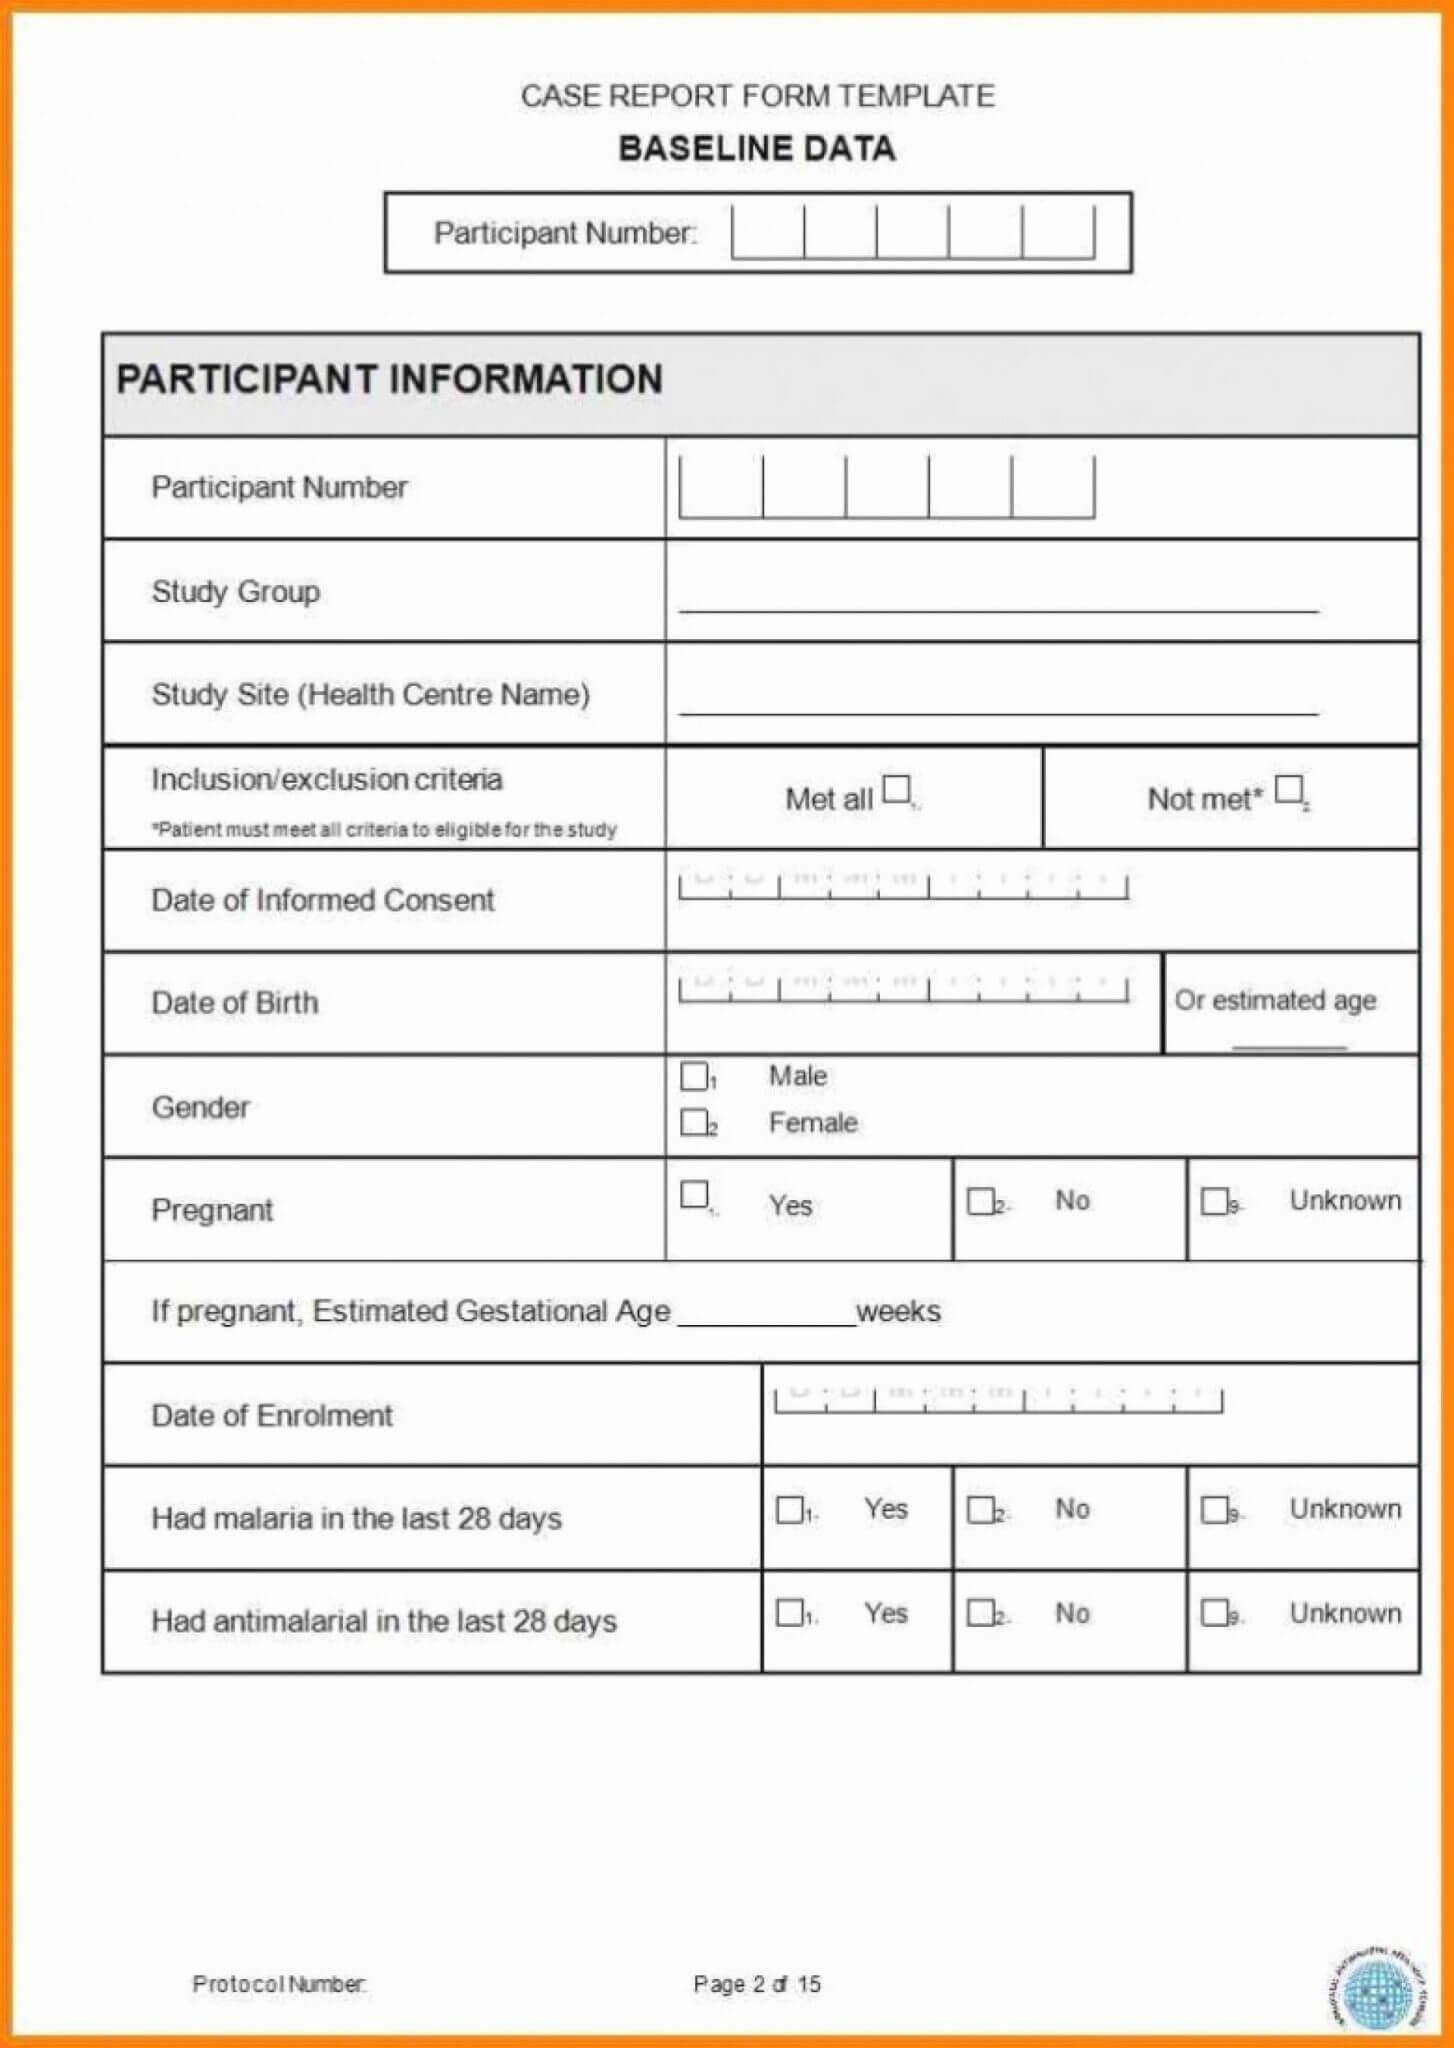 Case Report Form Template Unique Catering Resume Clinical Pertaining To Baseline Report Template